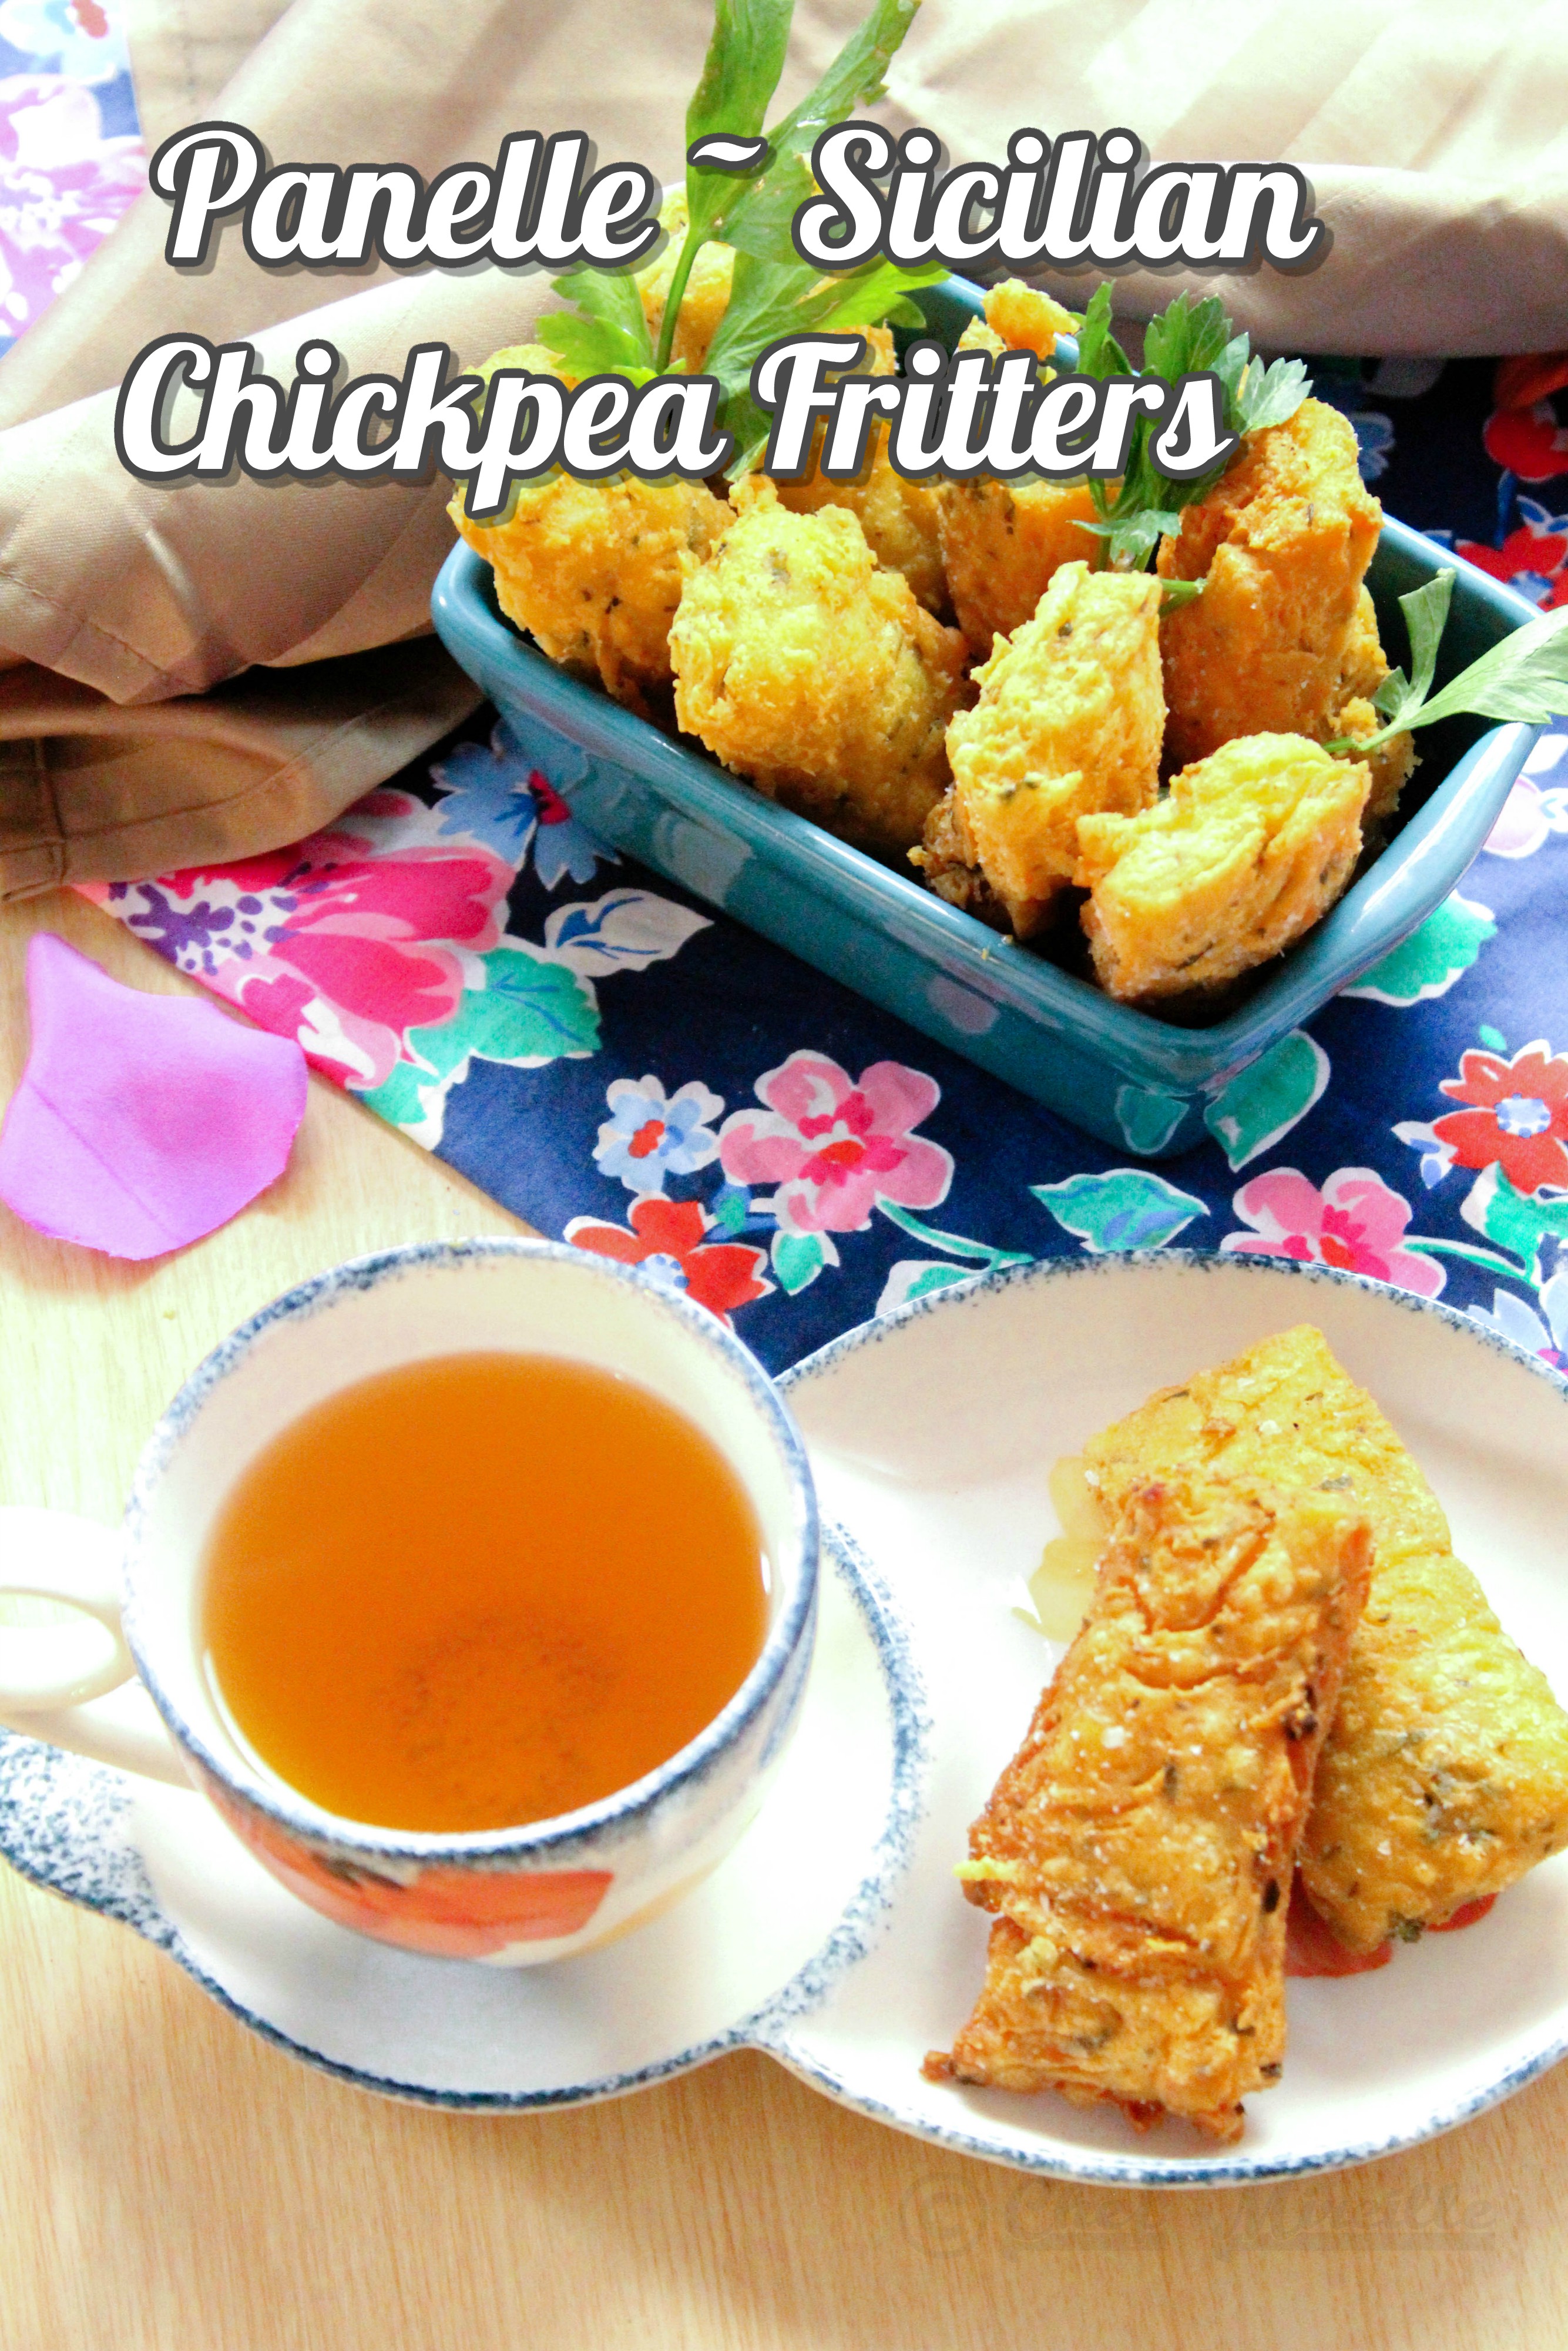 Panelle - Sicilan Chickpea Fritters